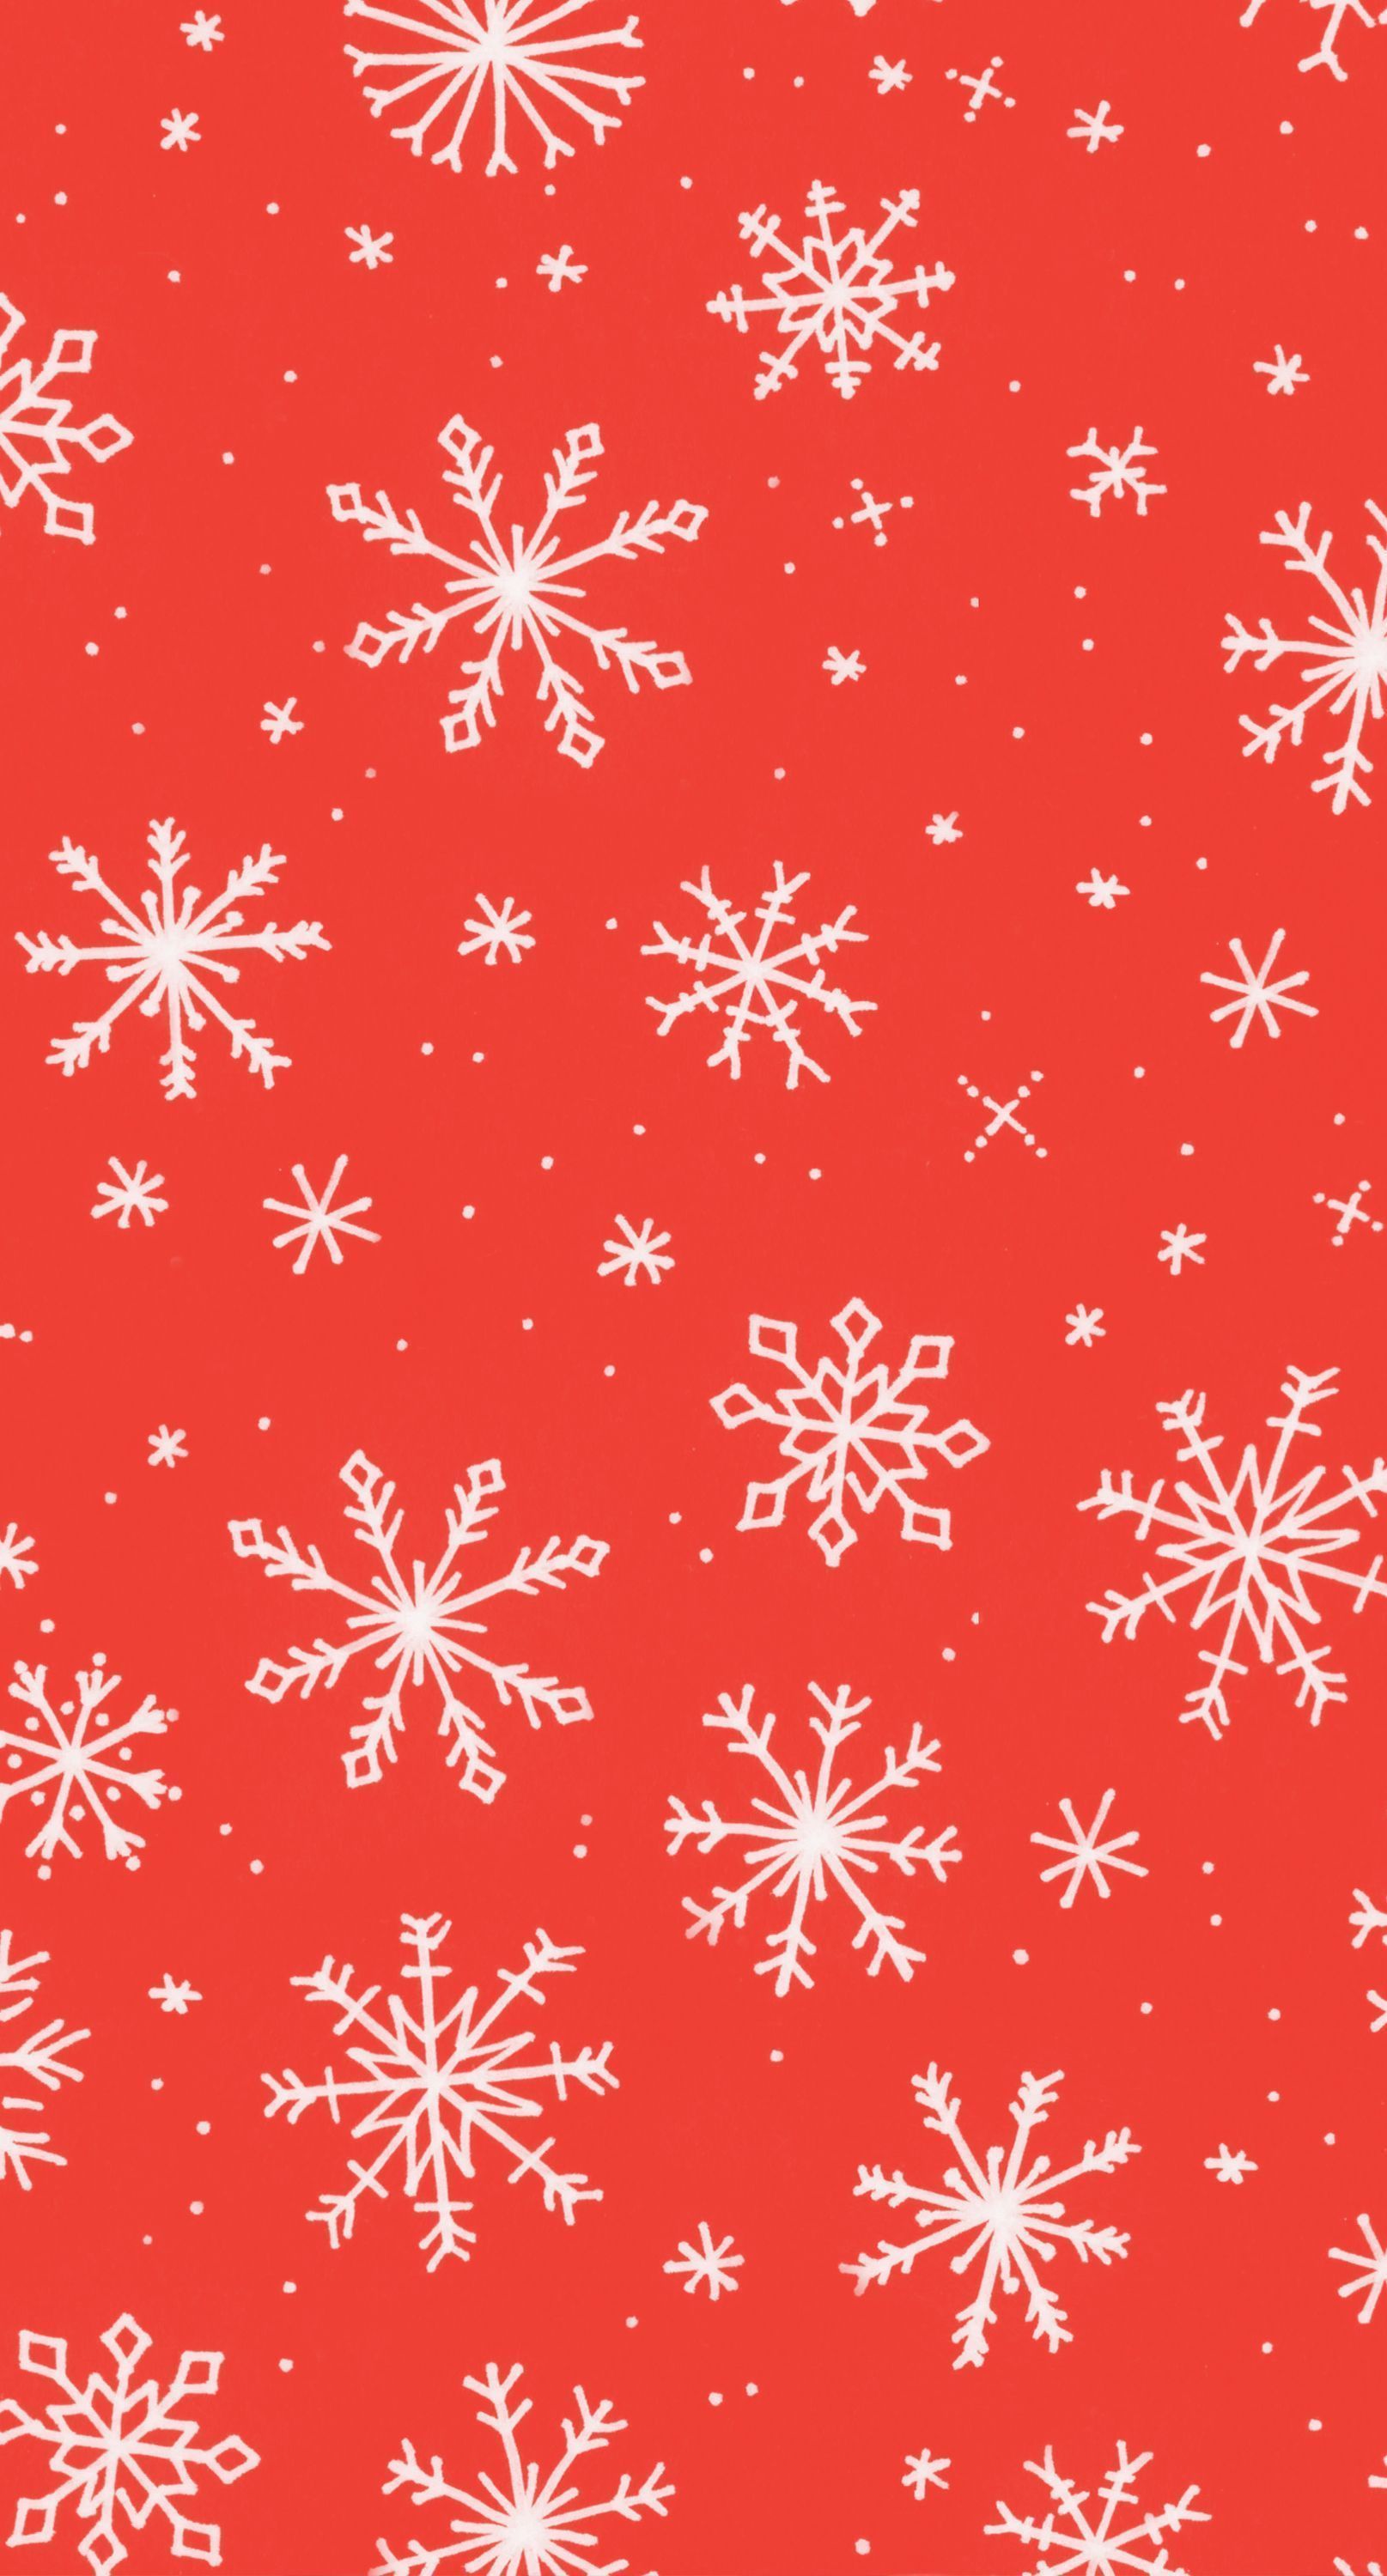 Red background with white snowflakes - Snowflake